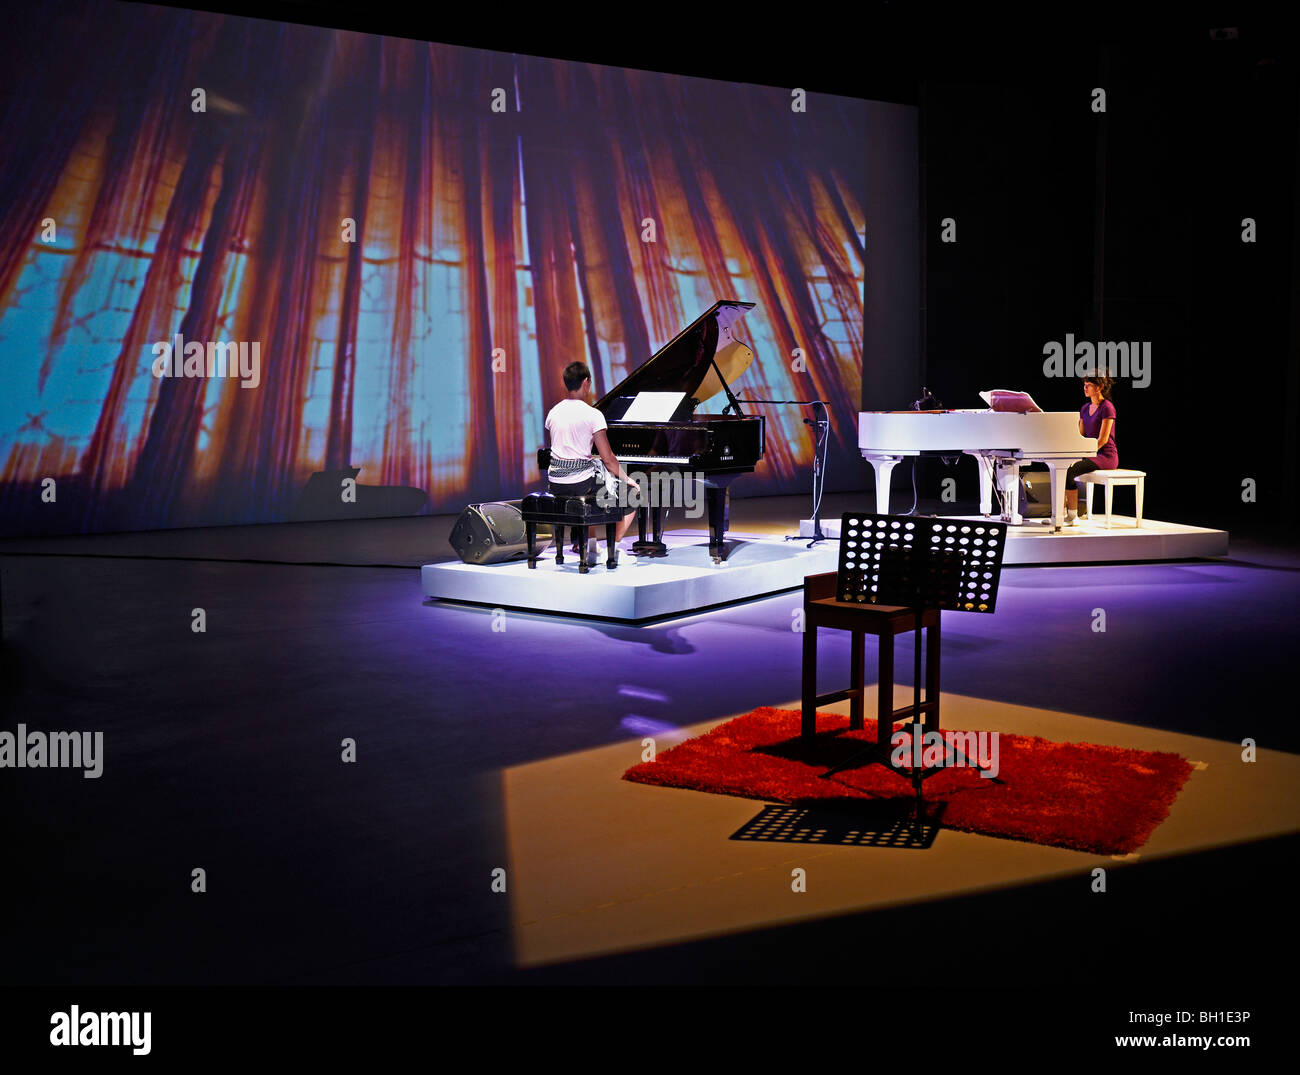 Concert pianists on stage at a Thai venue. Thailand S. E. Asia Stock Photo